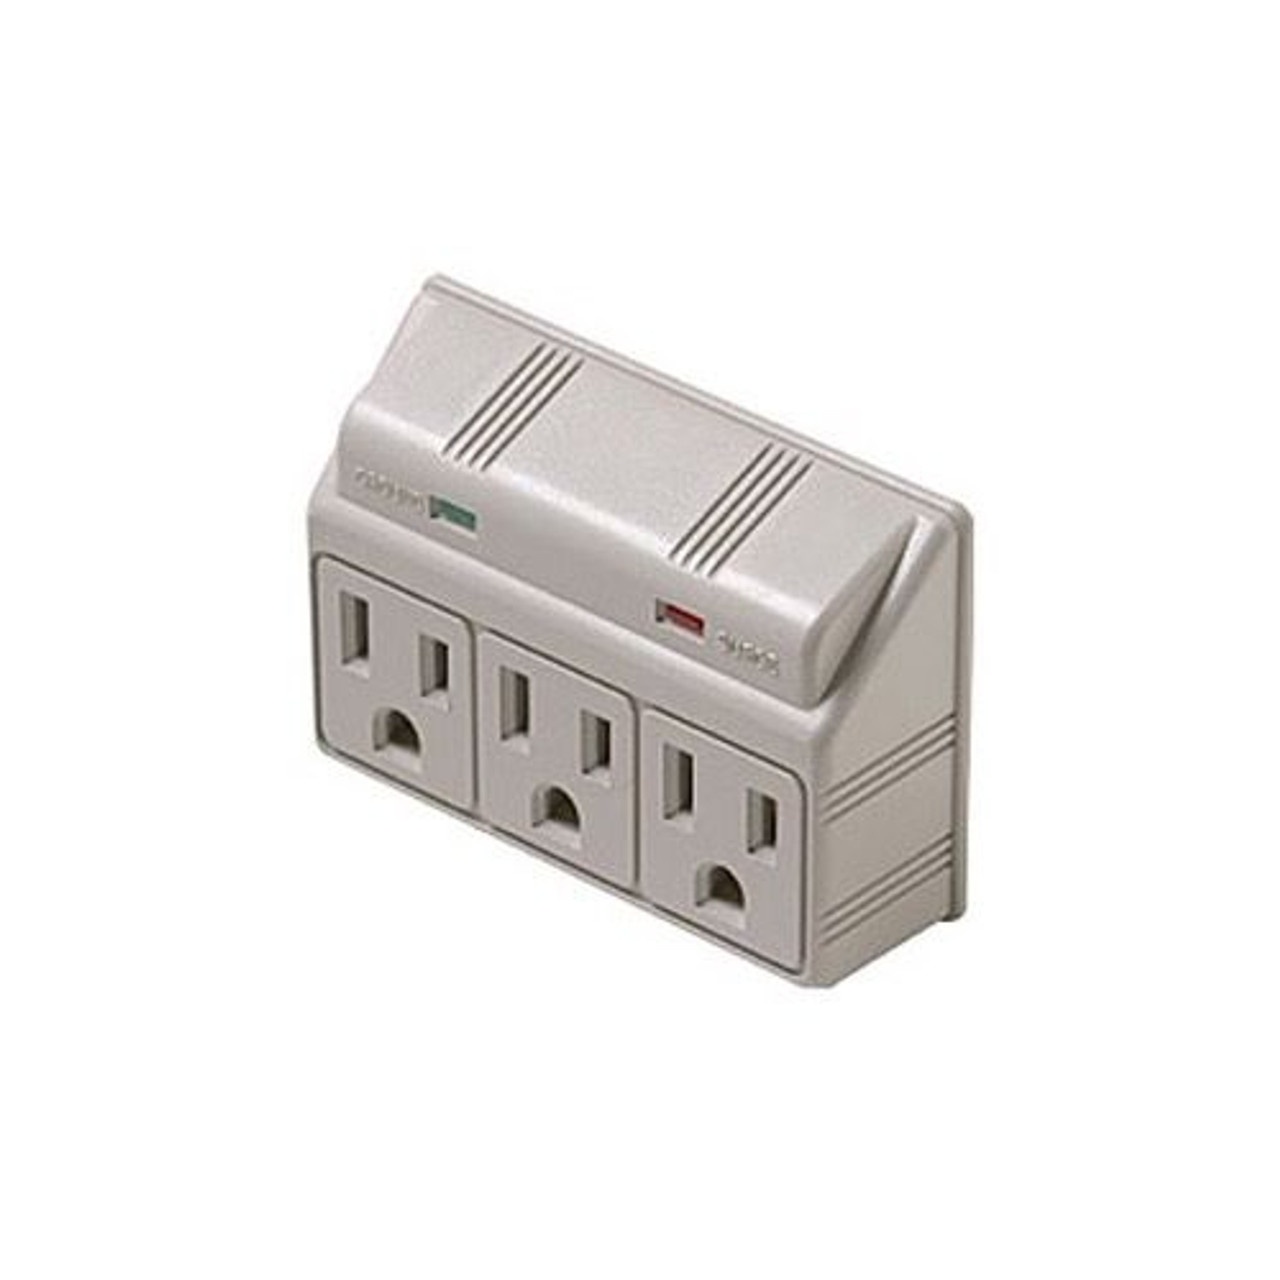 Steren 905-304 3 Outlet Surge Protector Wall Mount Plug-In Tap 300 Volt Clamping 270 Joules 3-Wire 120 VAC 15 Amp UL Listed 3-MOV Line 1875 Watts 25ns Response Time